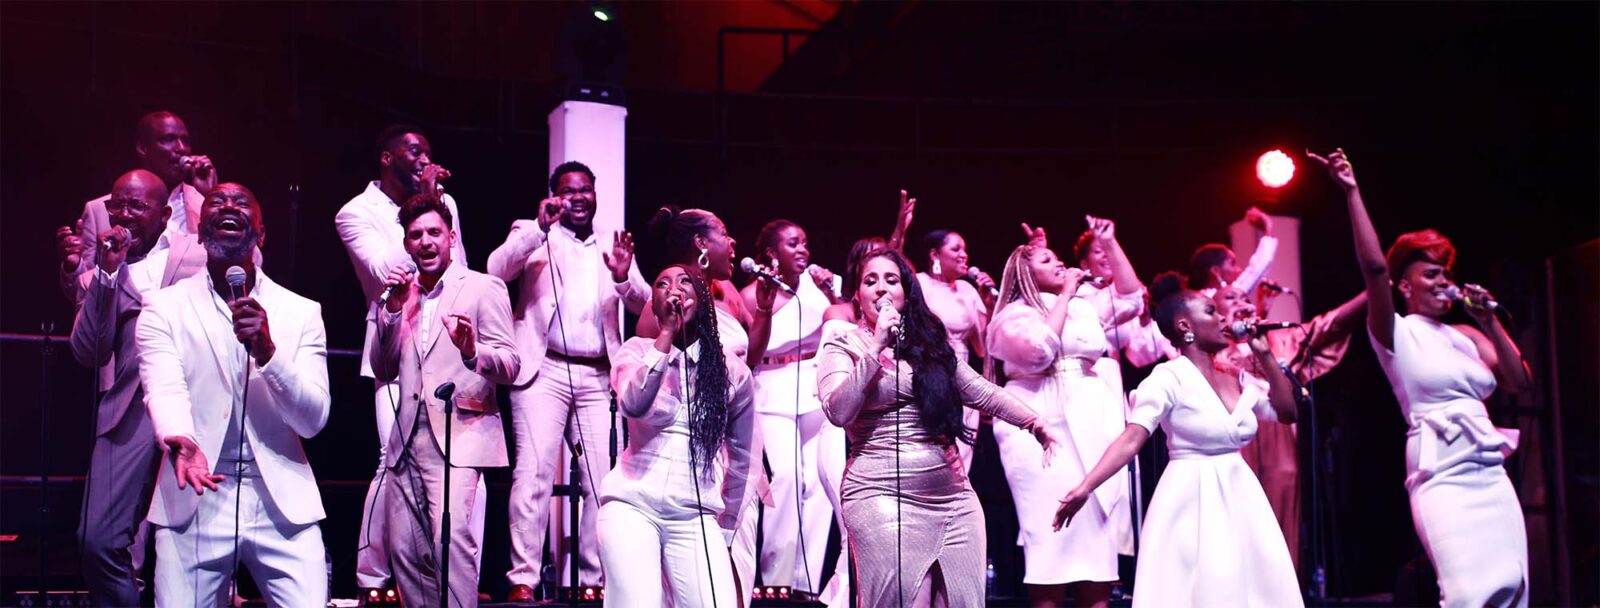 singers on stage, a large choir